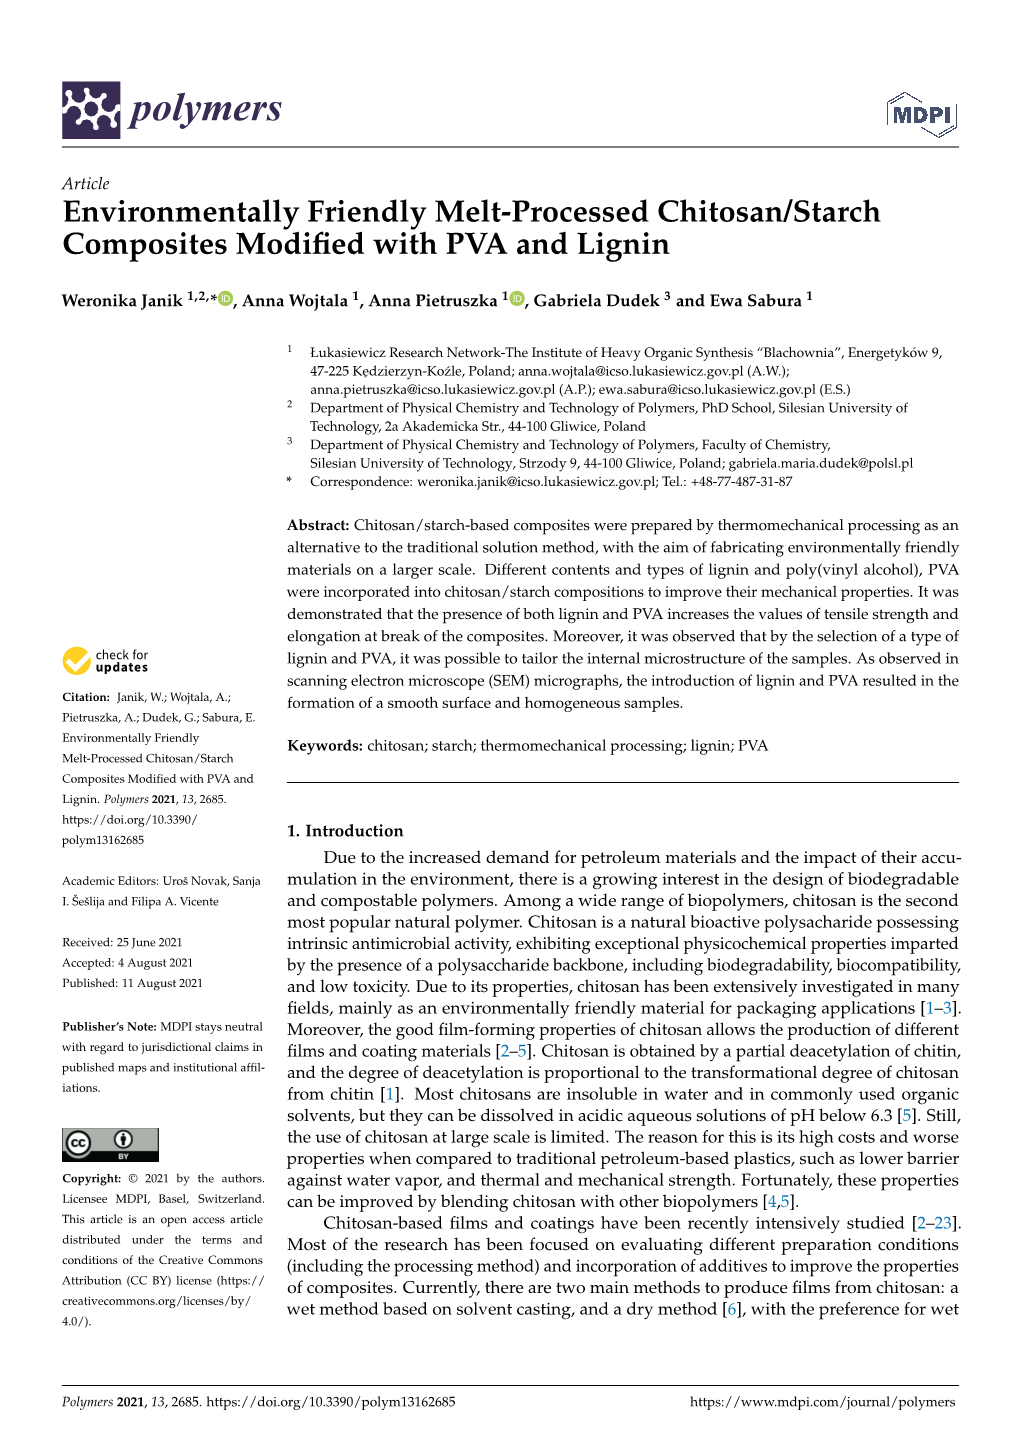 Environmentally Friendly Melt-Processed Chitosan/Starch Composites Modiﬁed with PVA and Lignin